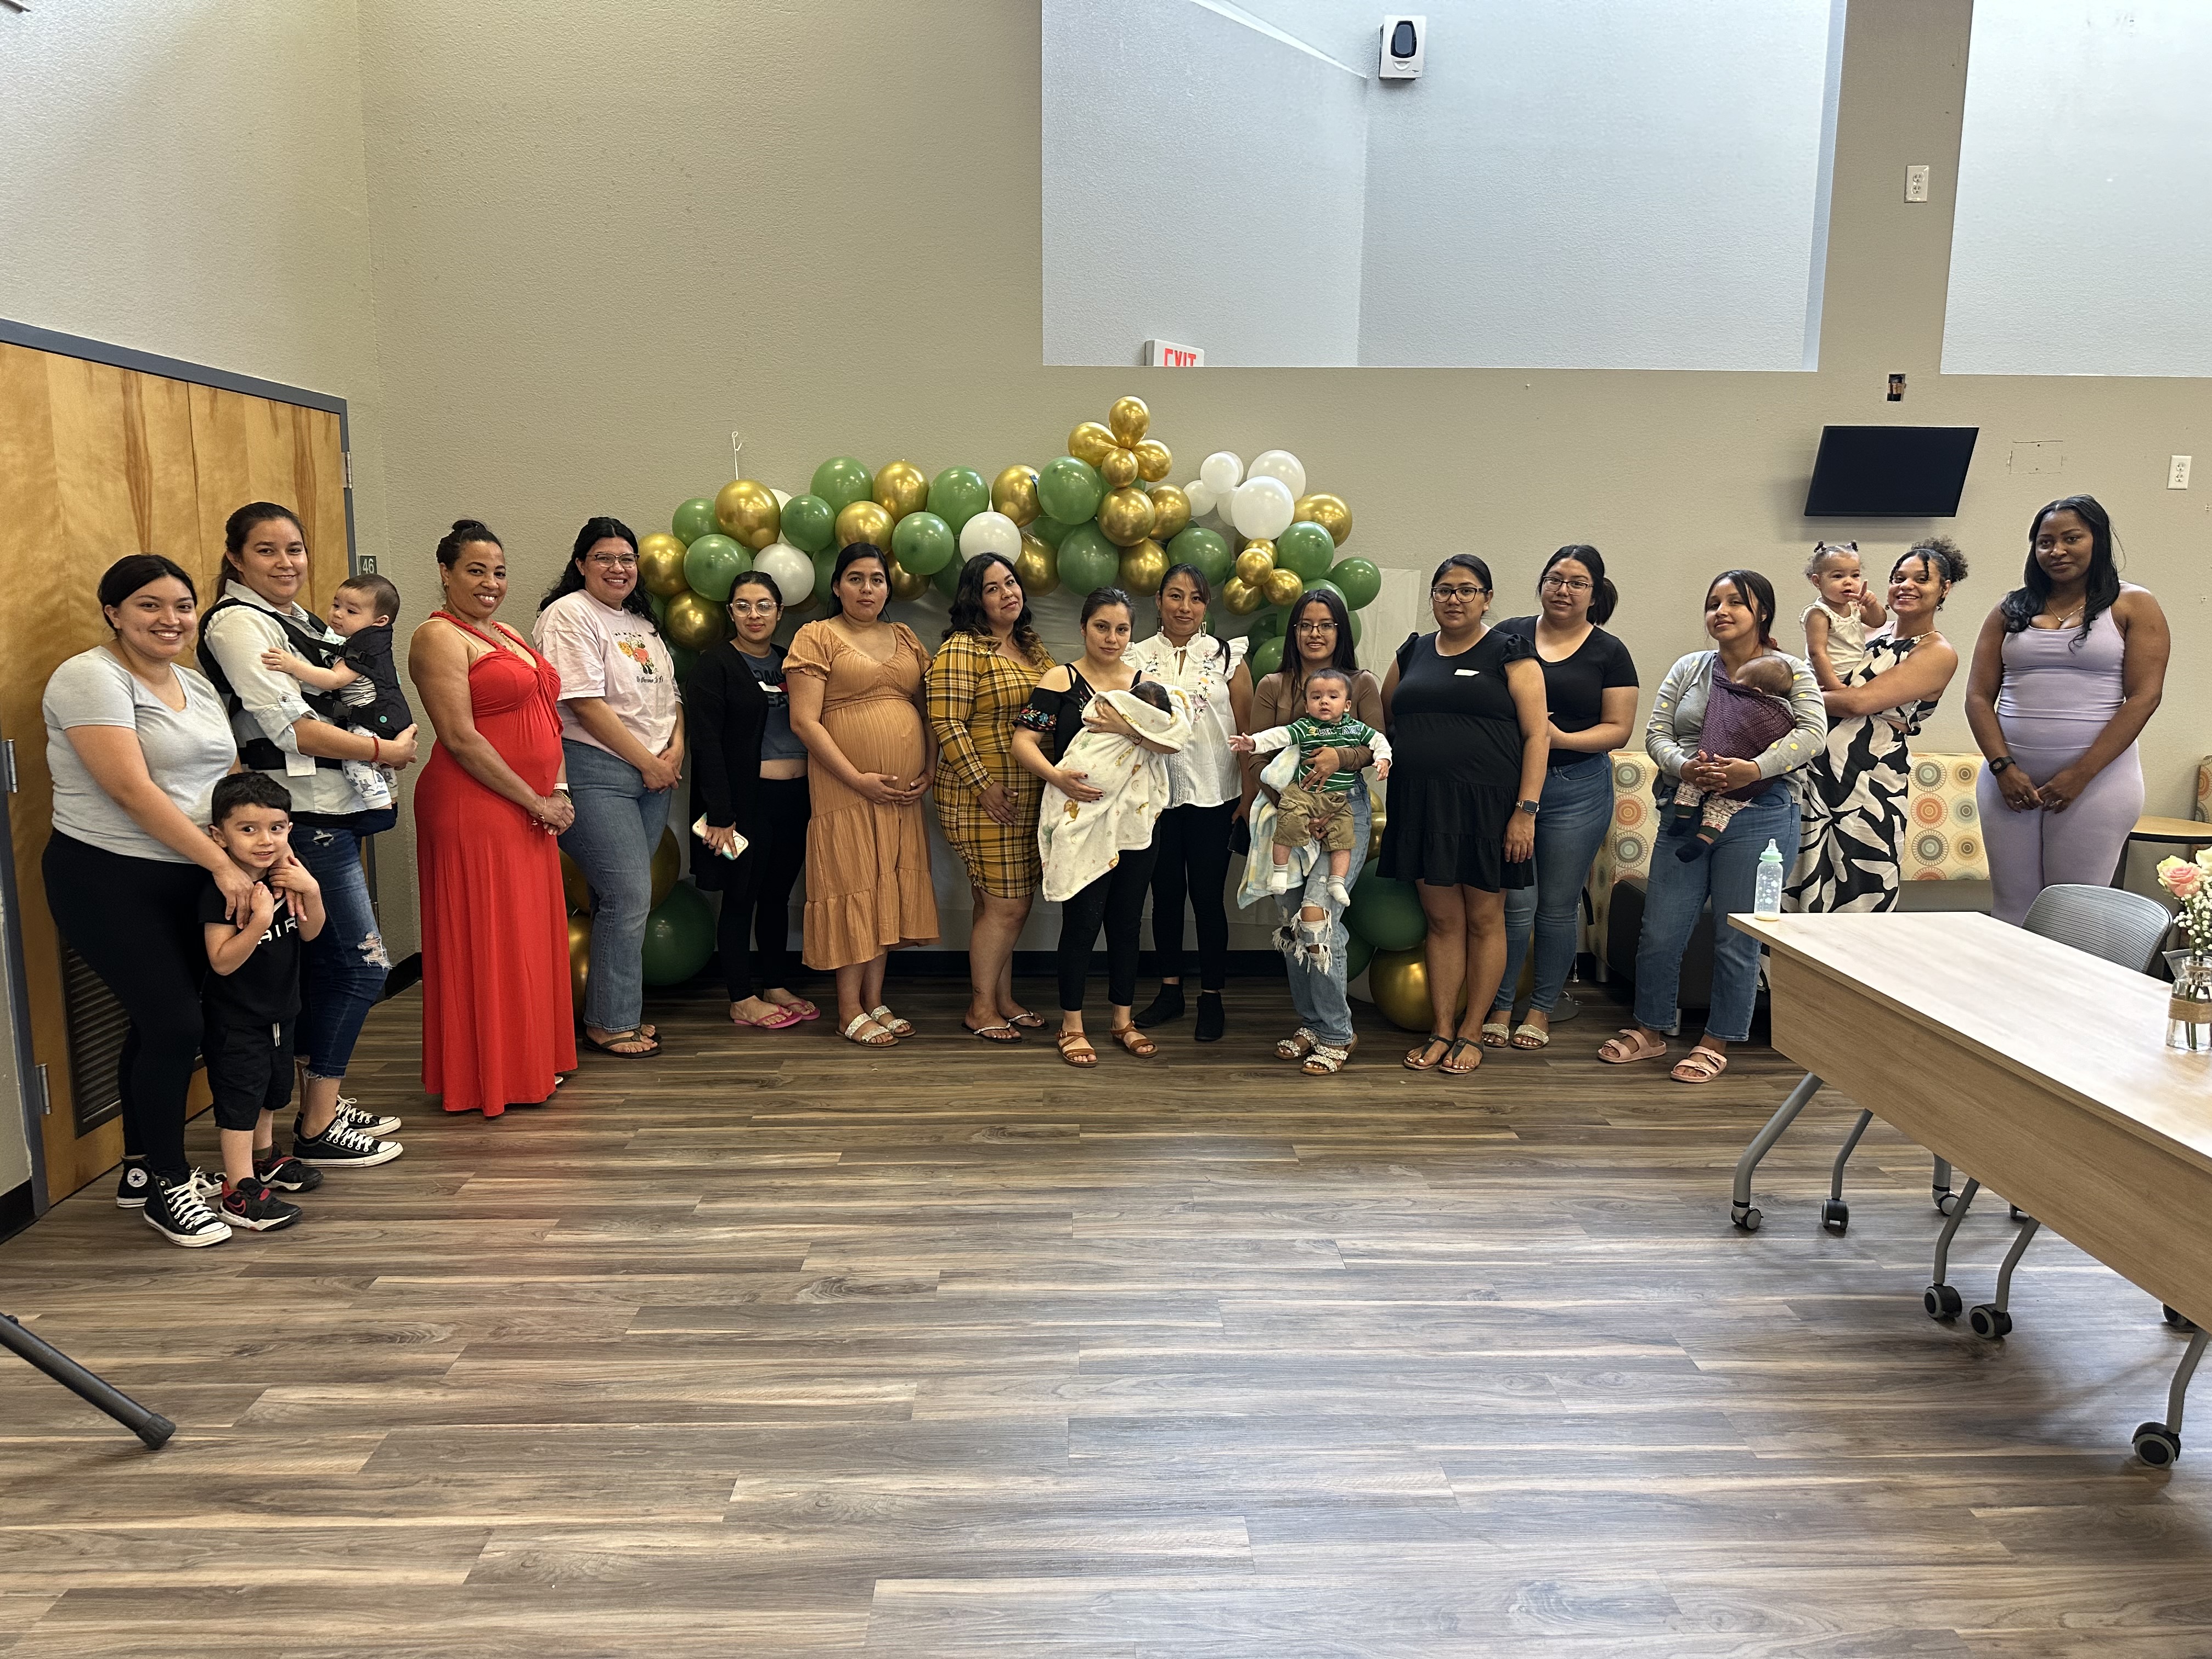 group of participants from community babyshower